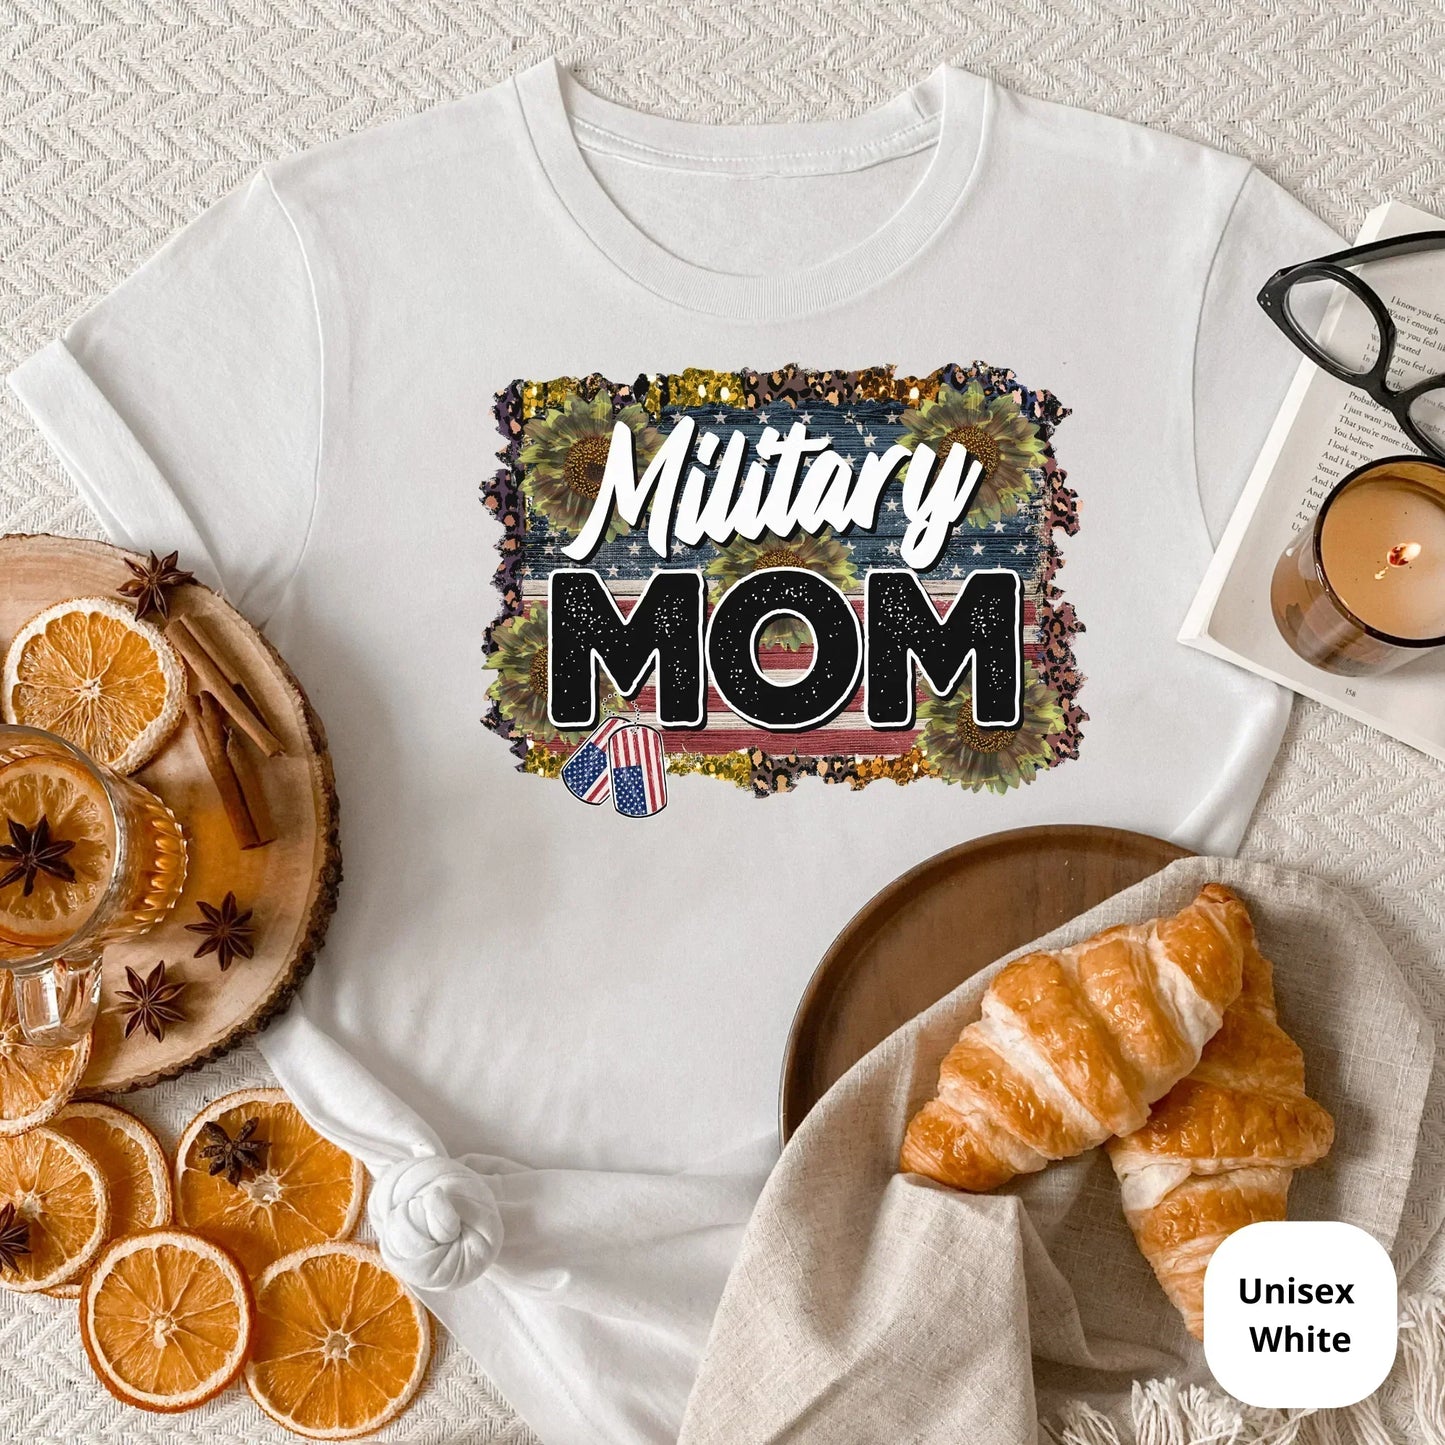 Military Mom Shirt, Proud Army Mom, Military Wife Sweatshirt, Army Mom Gift, Air Force Mom, Support our troops, Marine Coast guard, Navy Mom